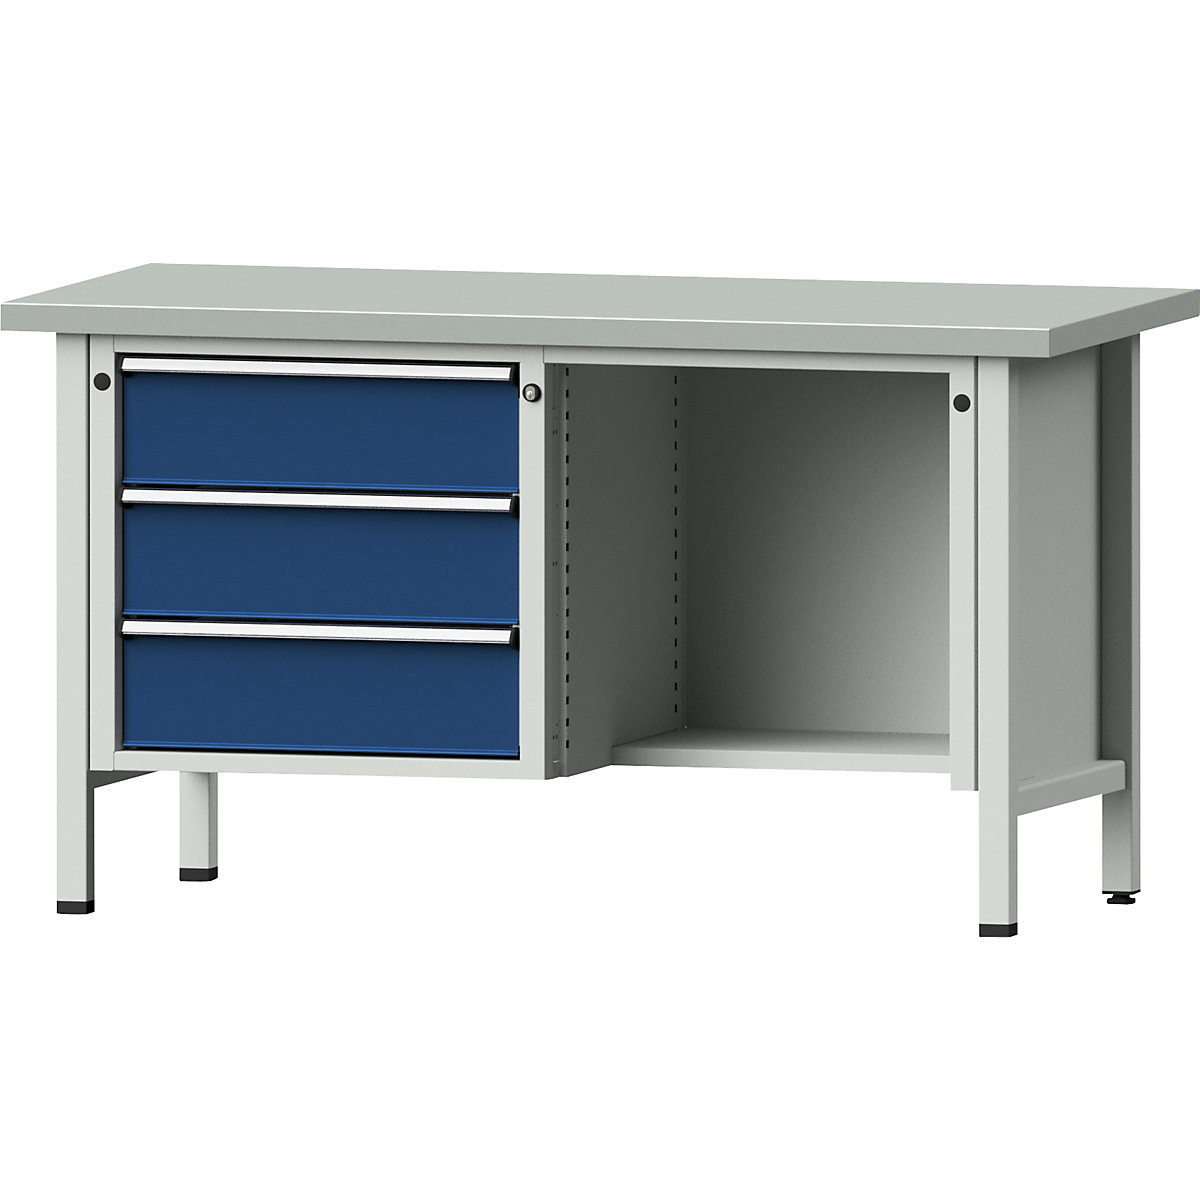 Workbench, frame construction – ANKE, 3 drawers, ½ shelf, sheet steel covering, partial extension-9